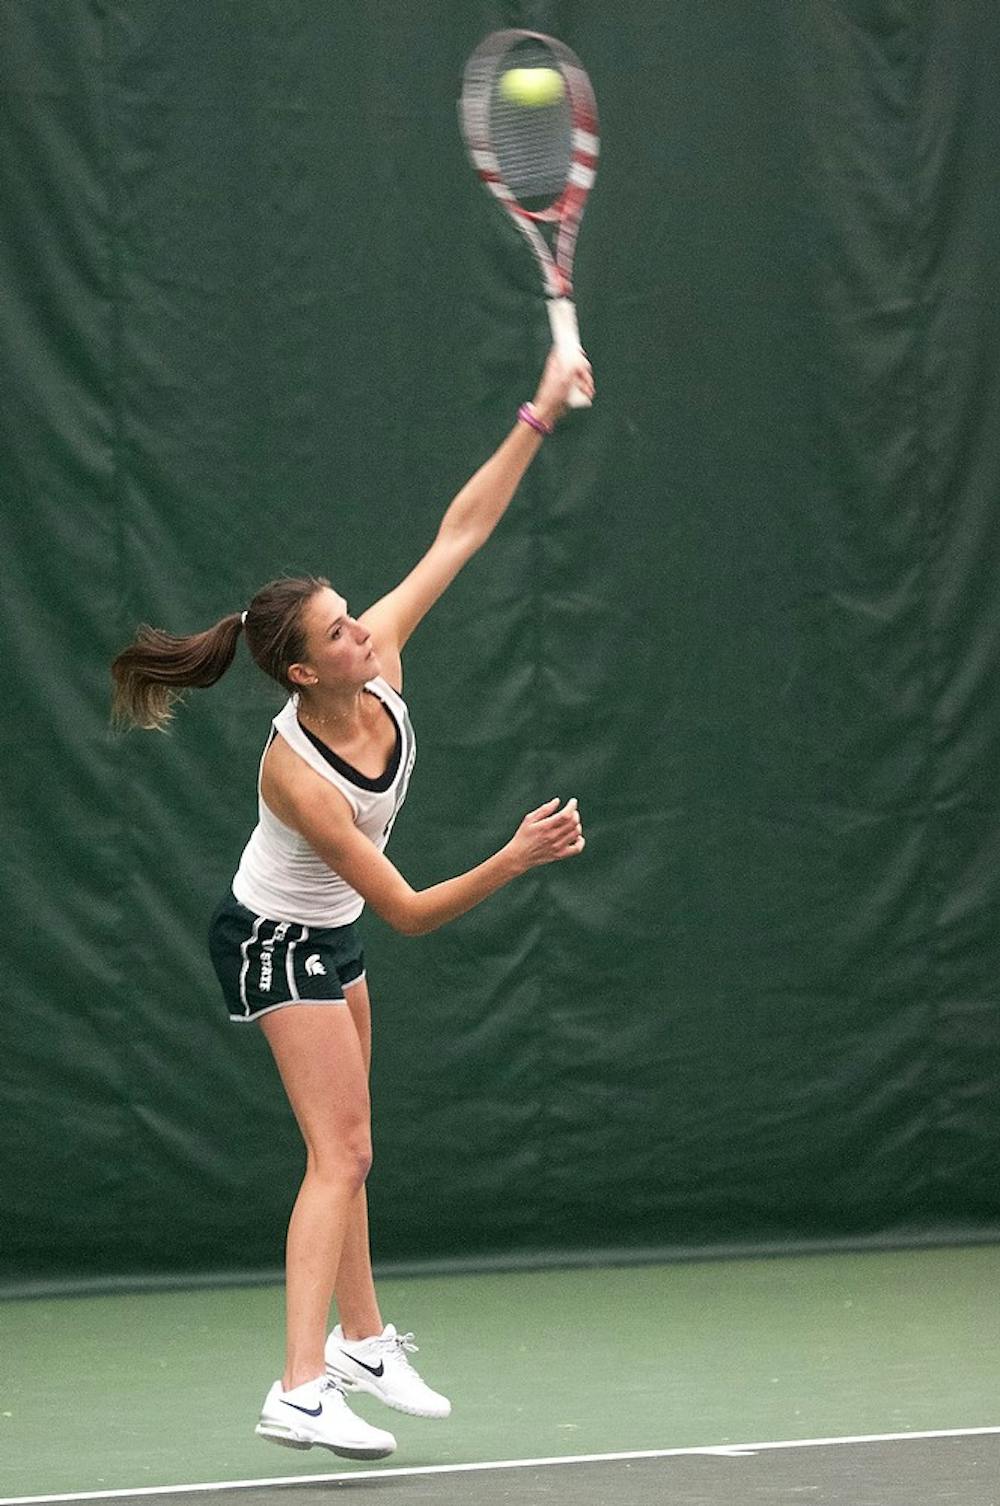 <p>Senior Marina Bohrer serves the ball during practice April 16, 2014, at the MSU Indoor Tennis Facility. Bohrer was named Big Ten Women's Tennis Athlete Of The Week last week. Danyelle Morrow/The State News</p>